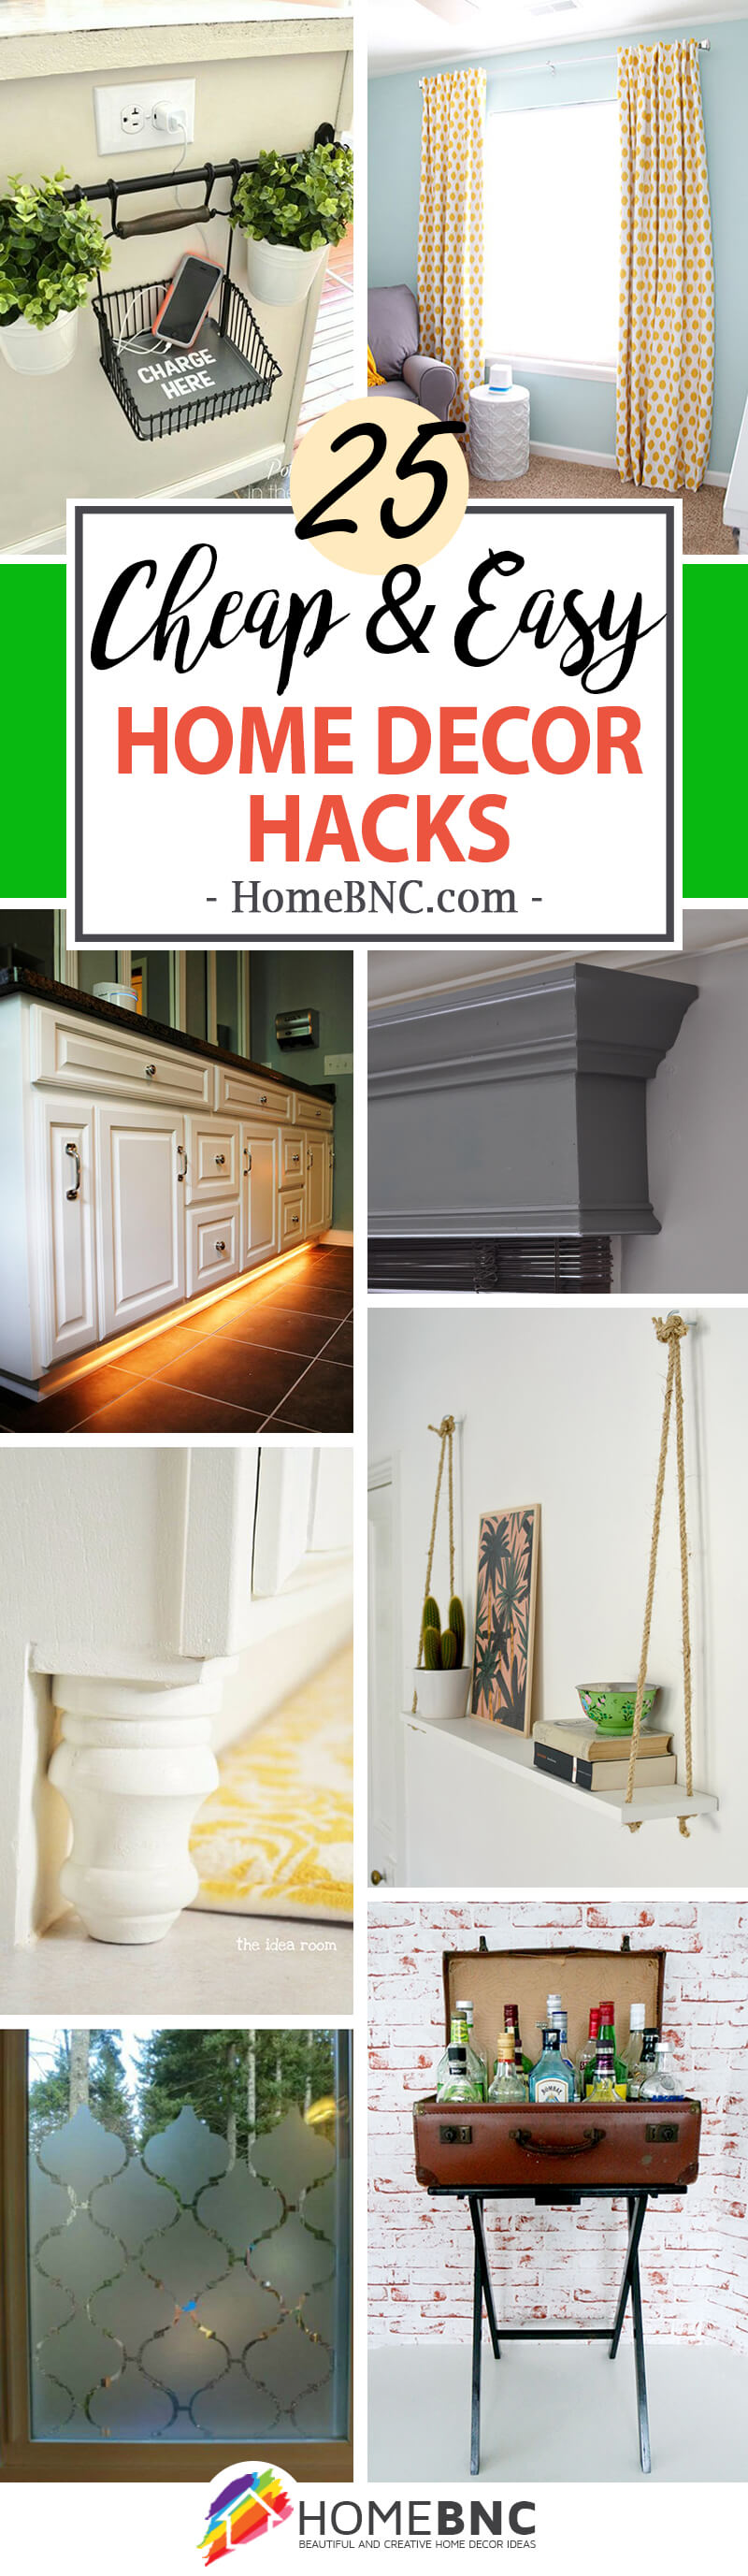 25 Best Home Decor Hacks Ideas And Projects For 2020